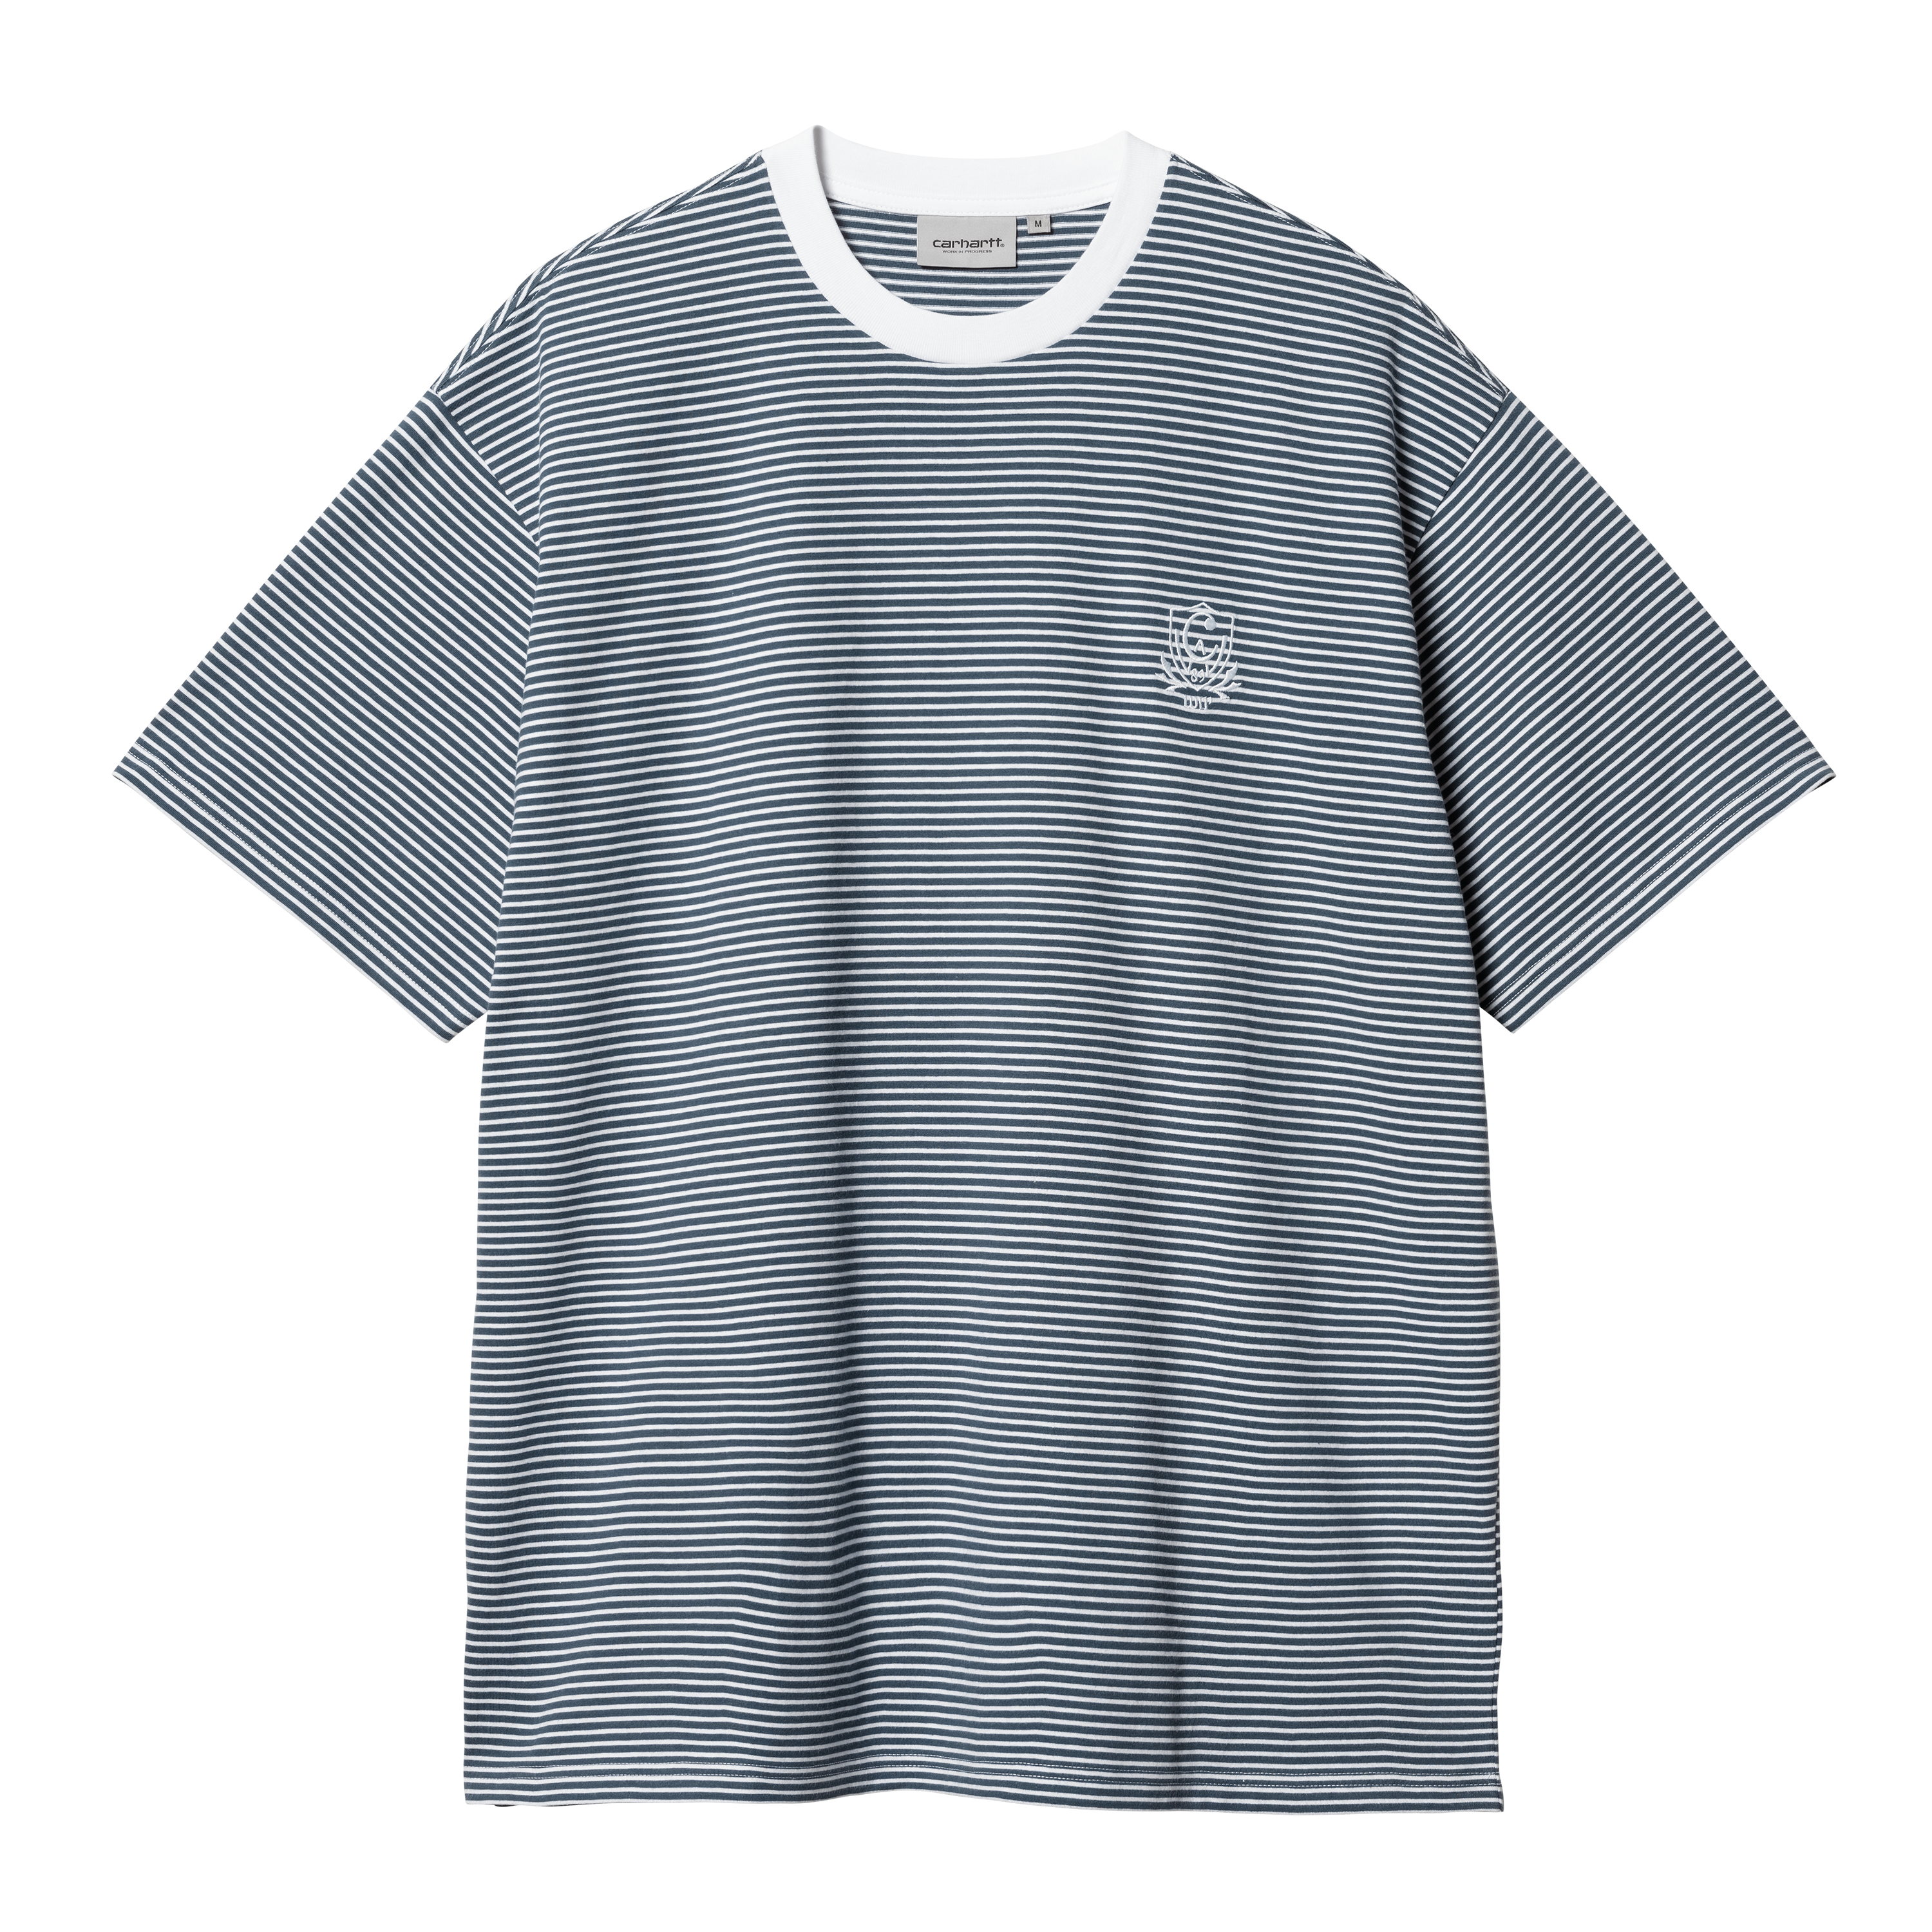 S/S LABEL STATE T-SHIRT - Tee-shirt col rond regular fit en coton